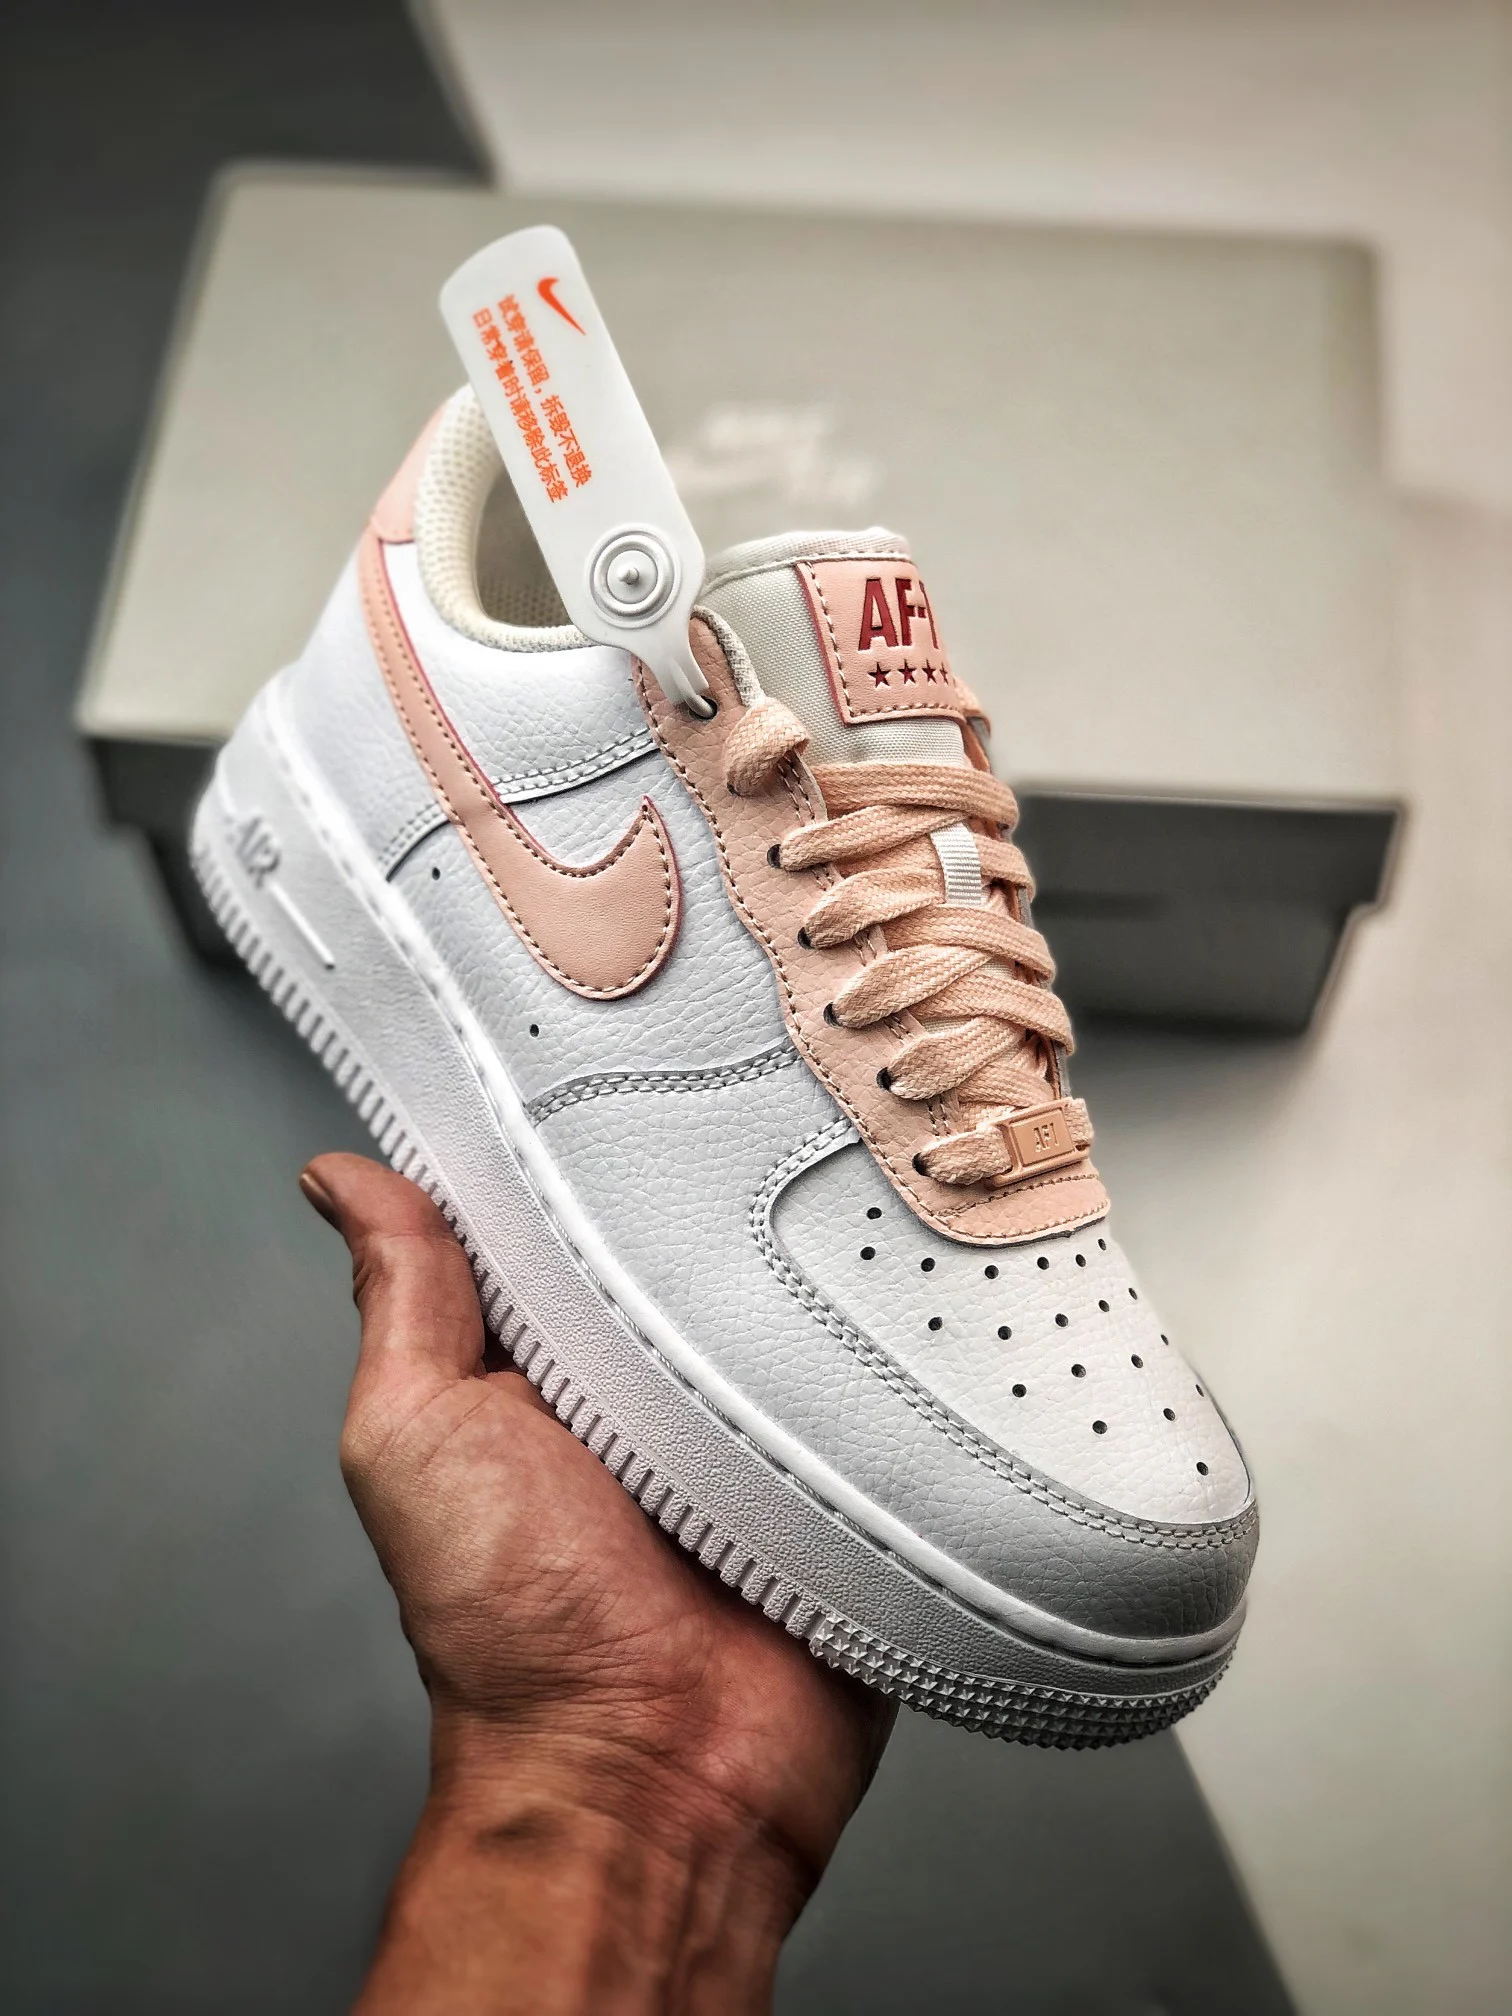 Nike Air Force 1 Low White Pale Coral-University Red 315115-167 For Sale